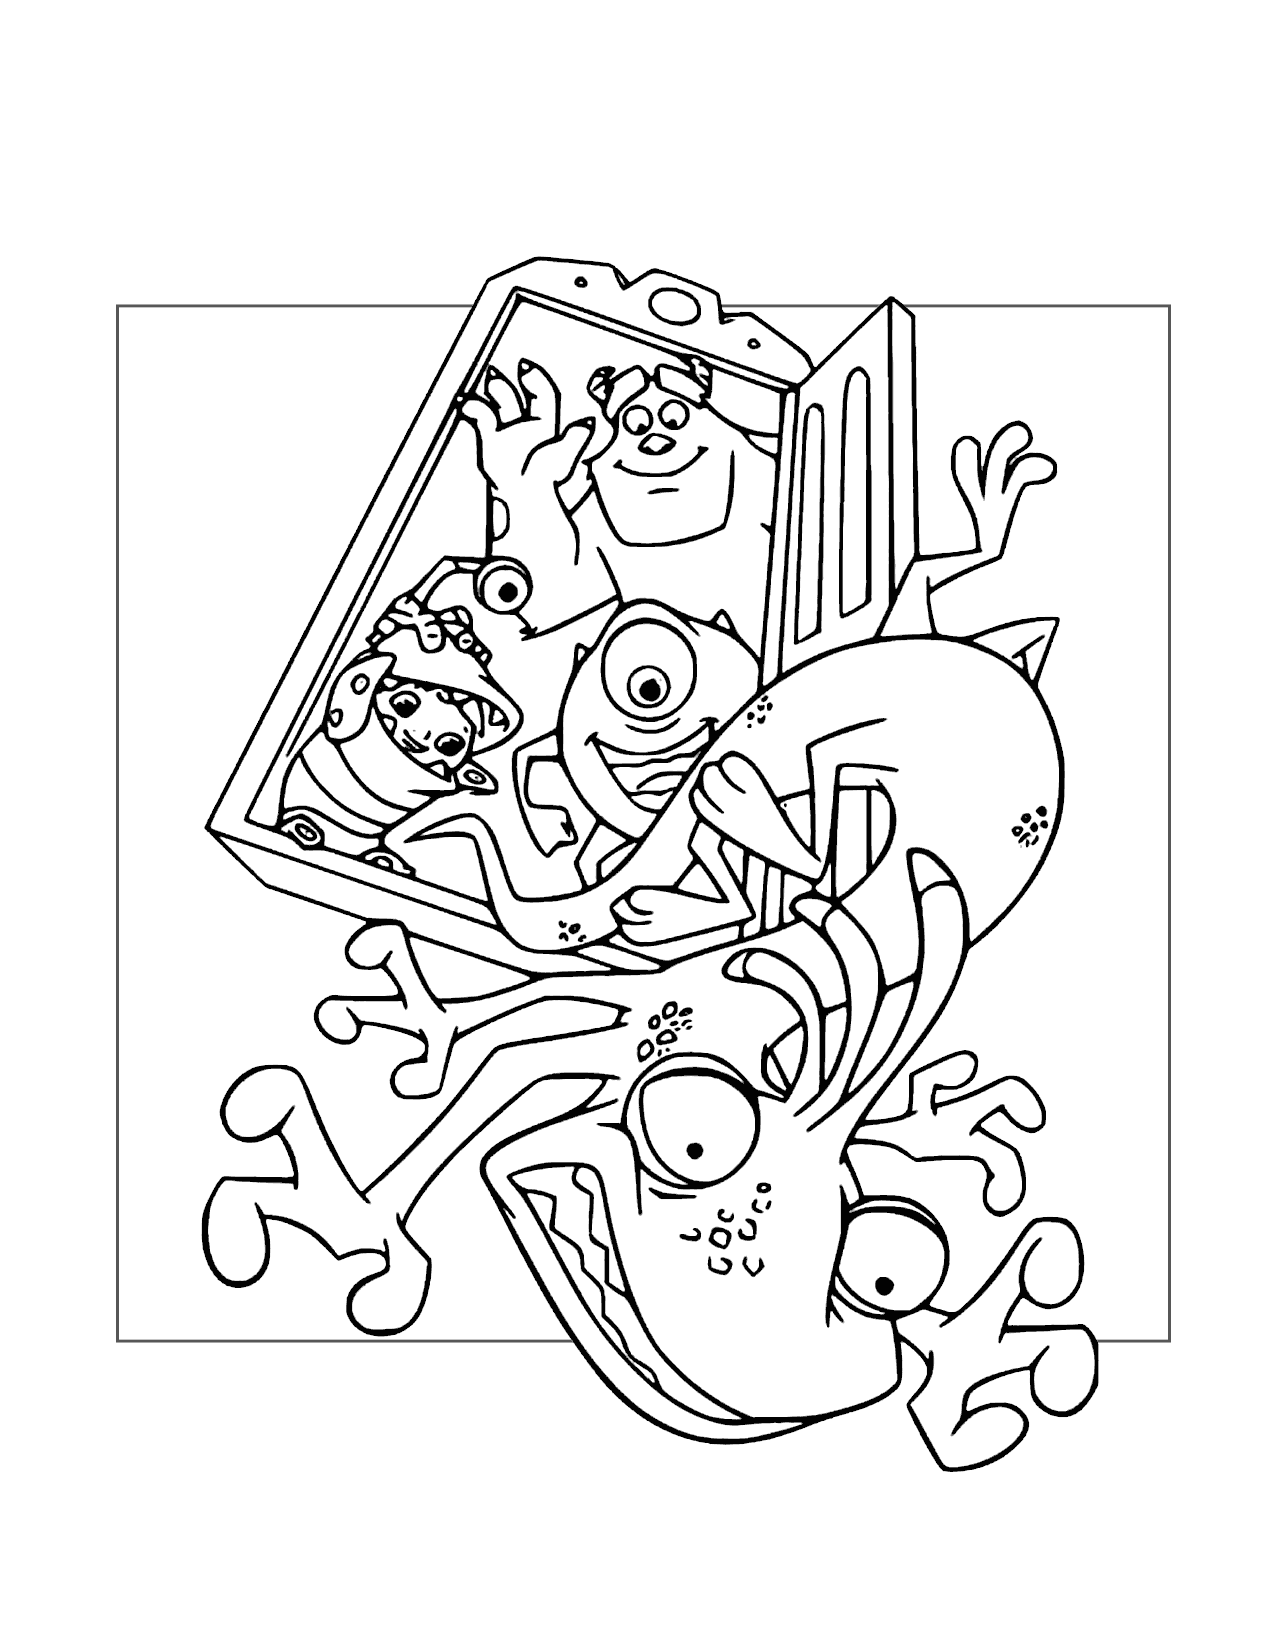 Randall Falling Through A Door Monsters Inc Coloring Page